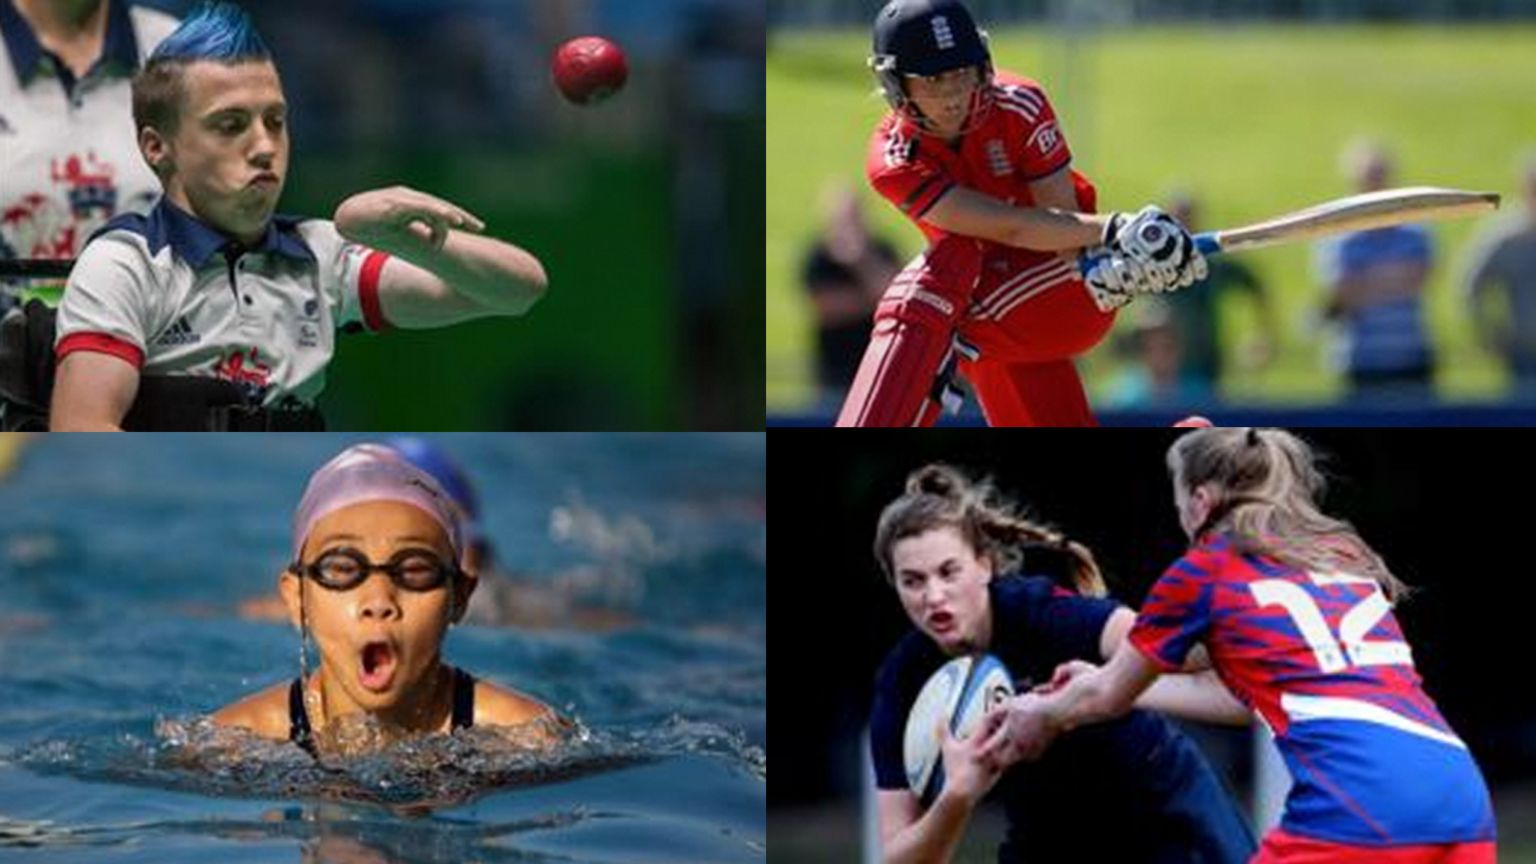 A montage of sports being played